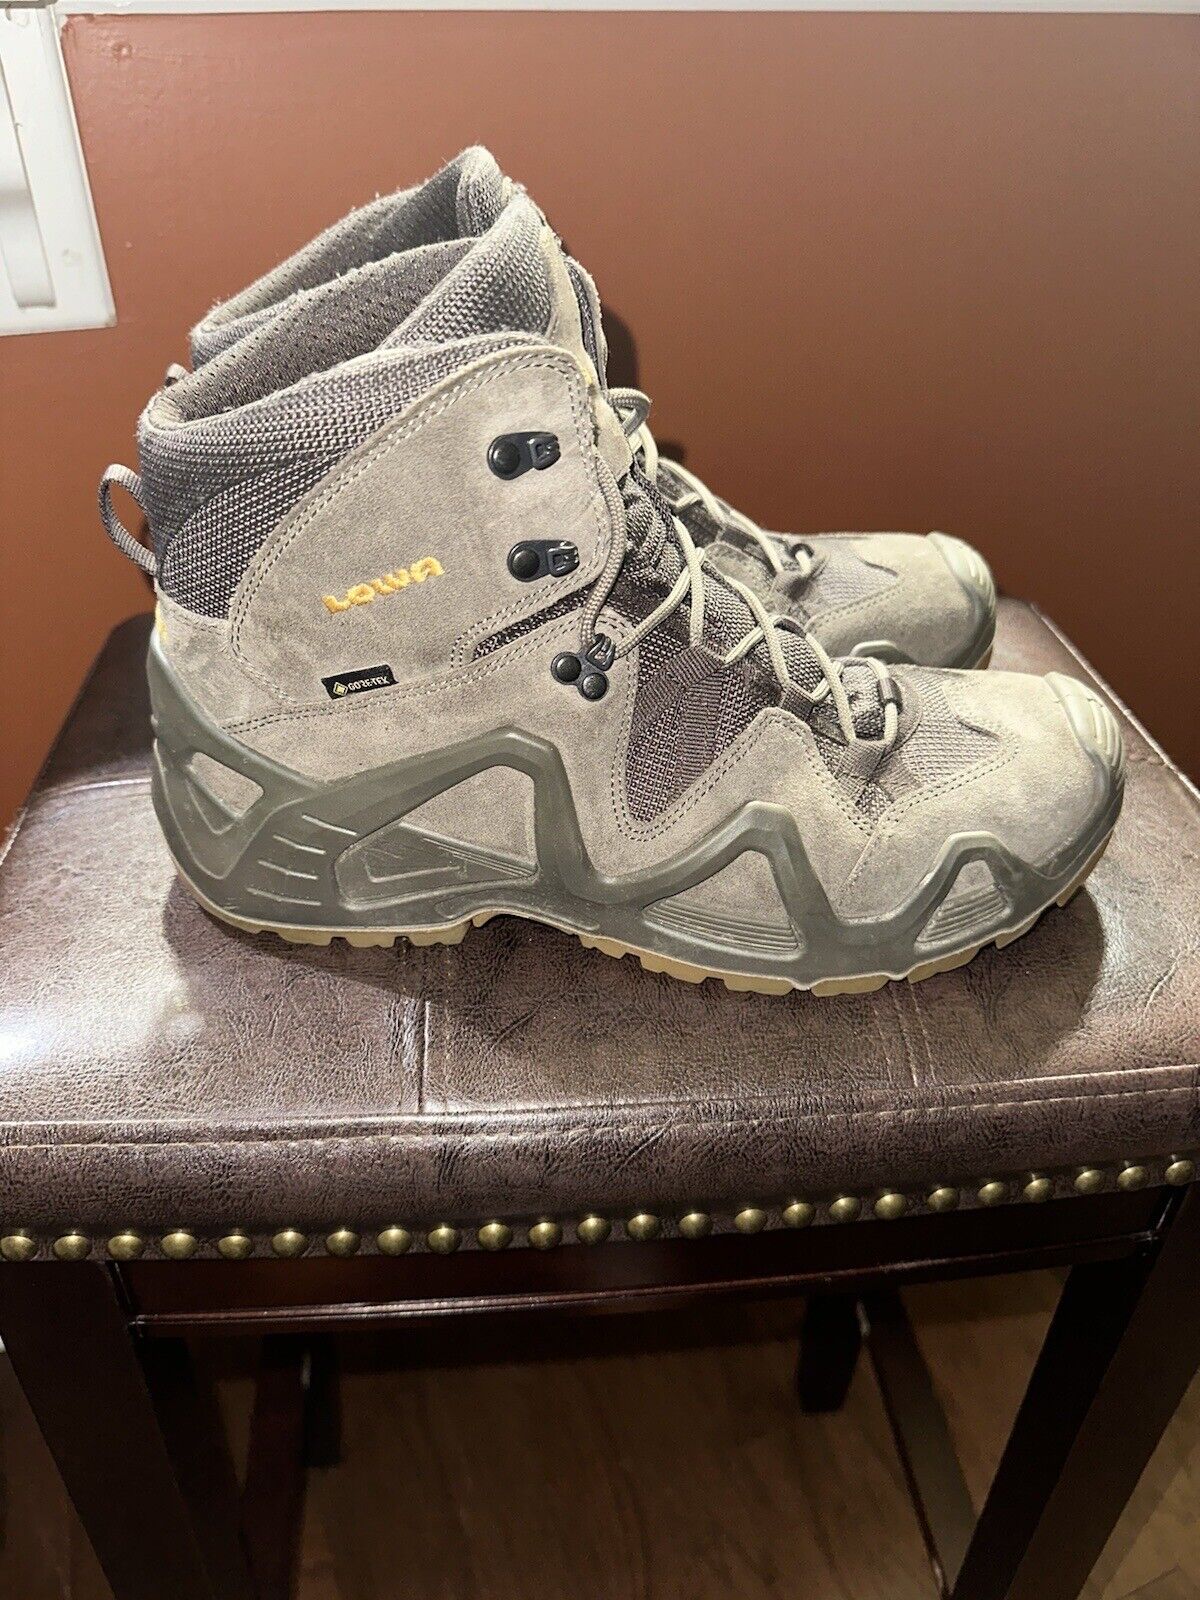 Lowa Men's Tan Zephyr GTX Mid TF Boots US Mens 10.5 - Great condition ...